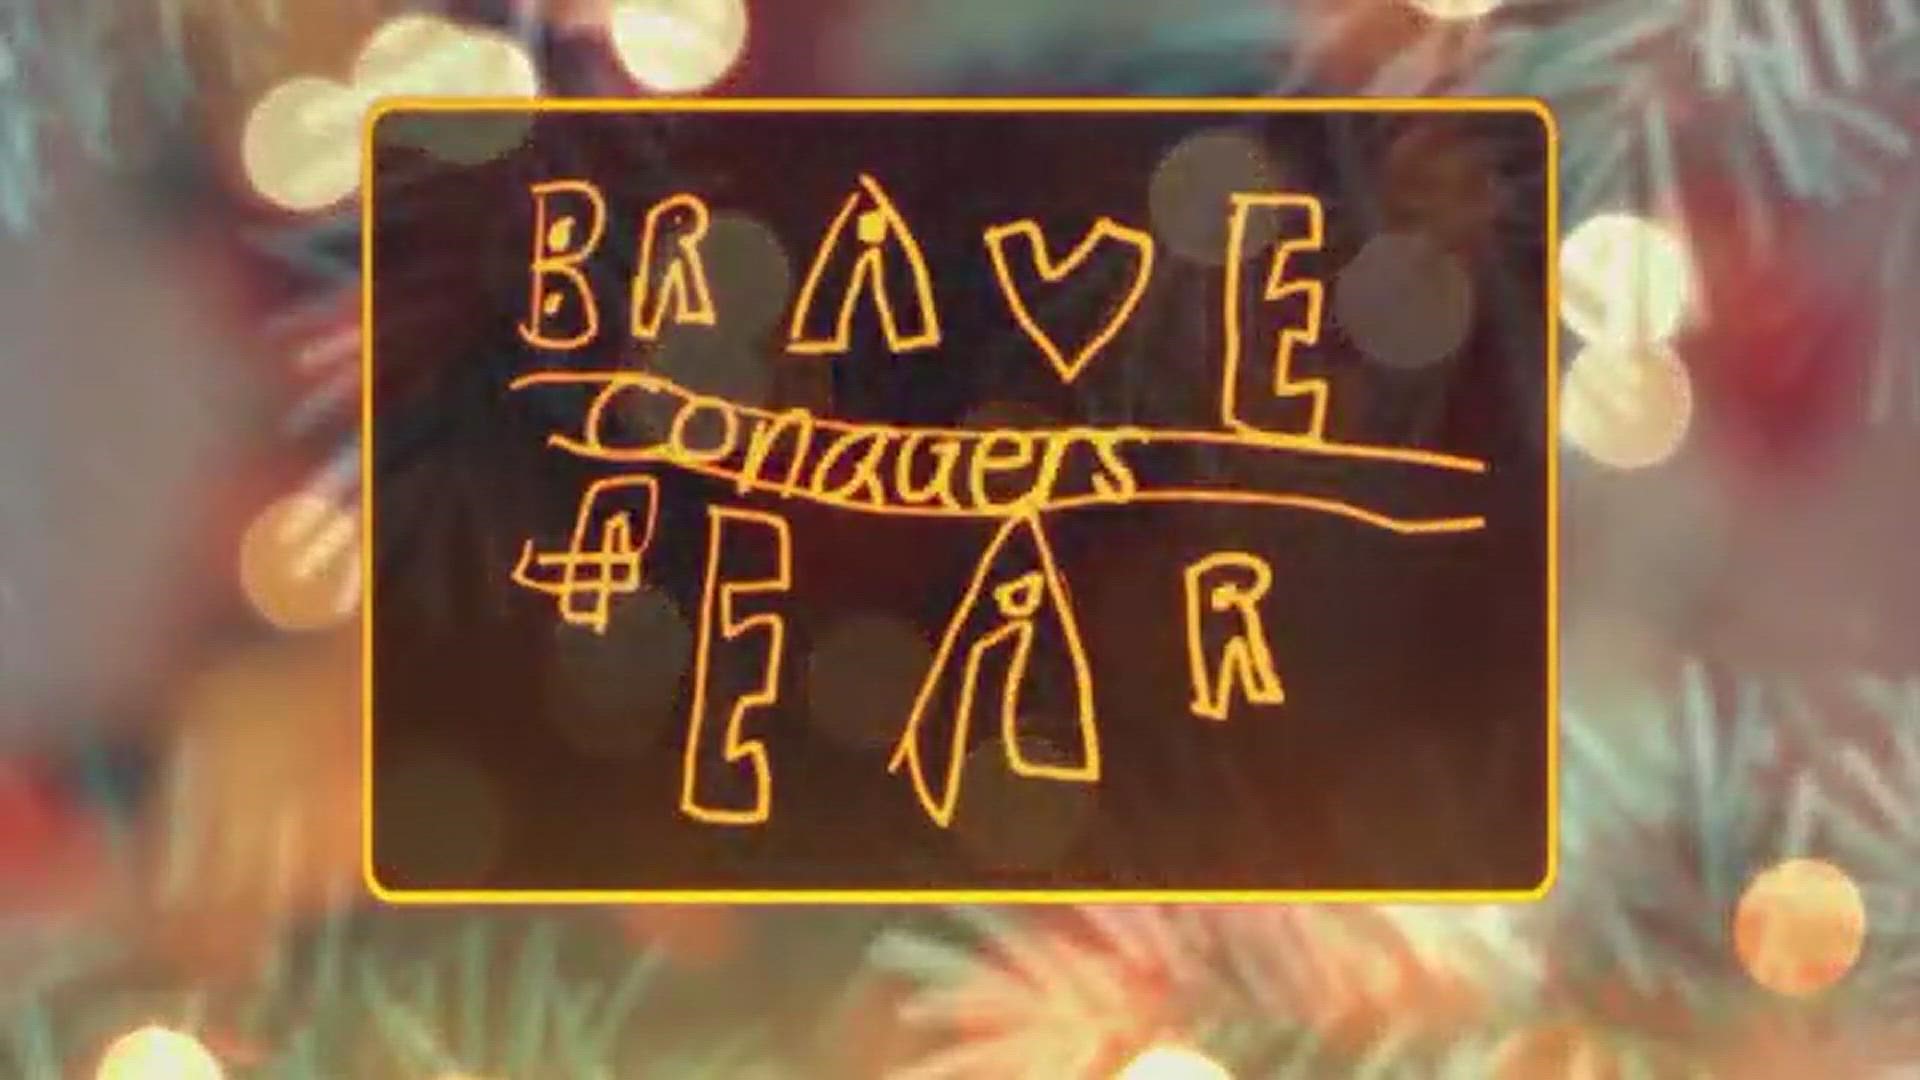 11Alive takes a look back at some of the people who have conquered their fears with bravery.